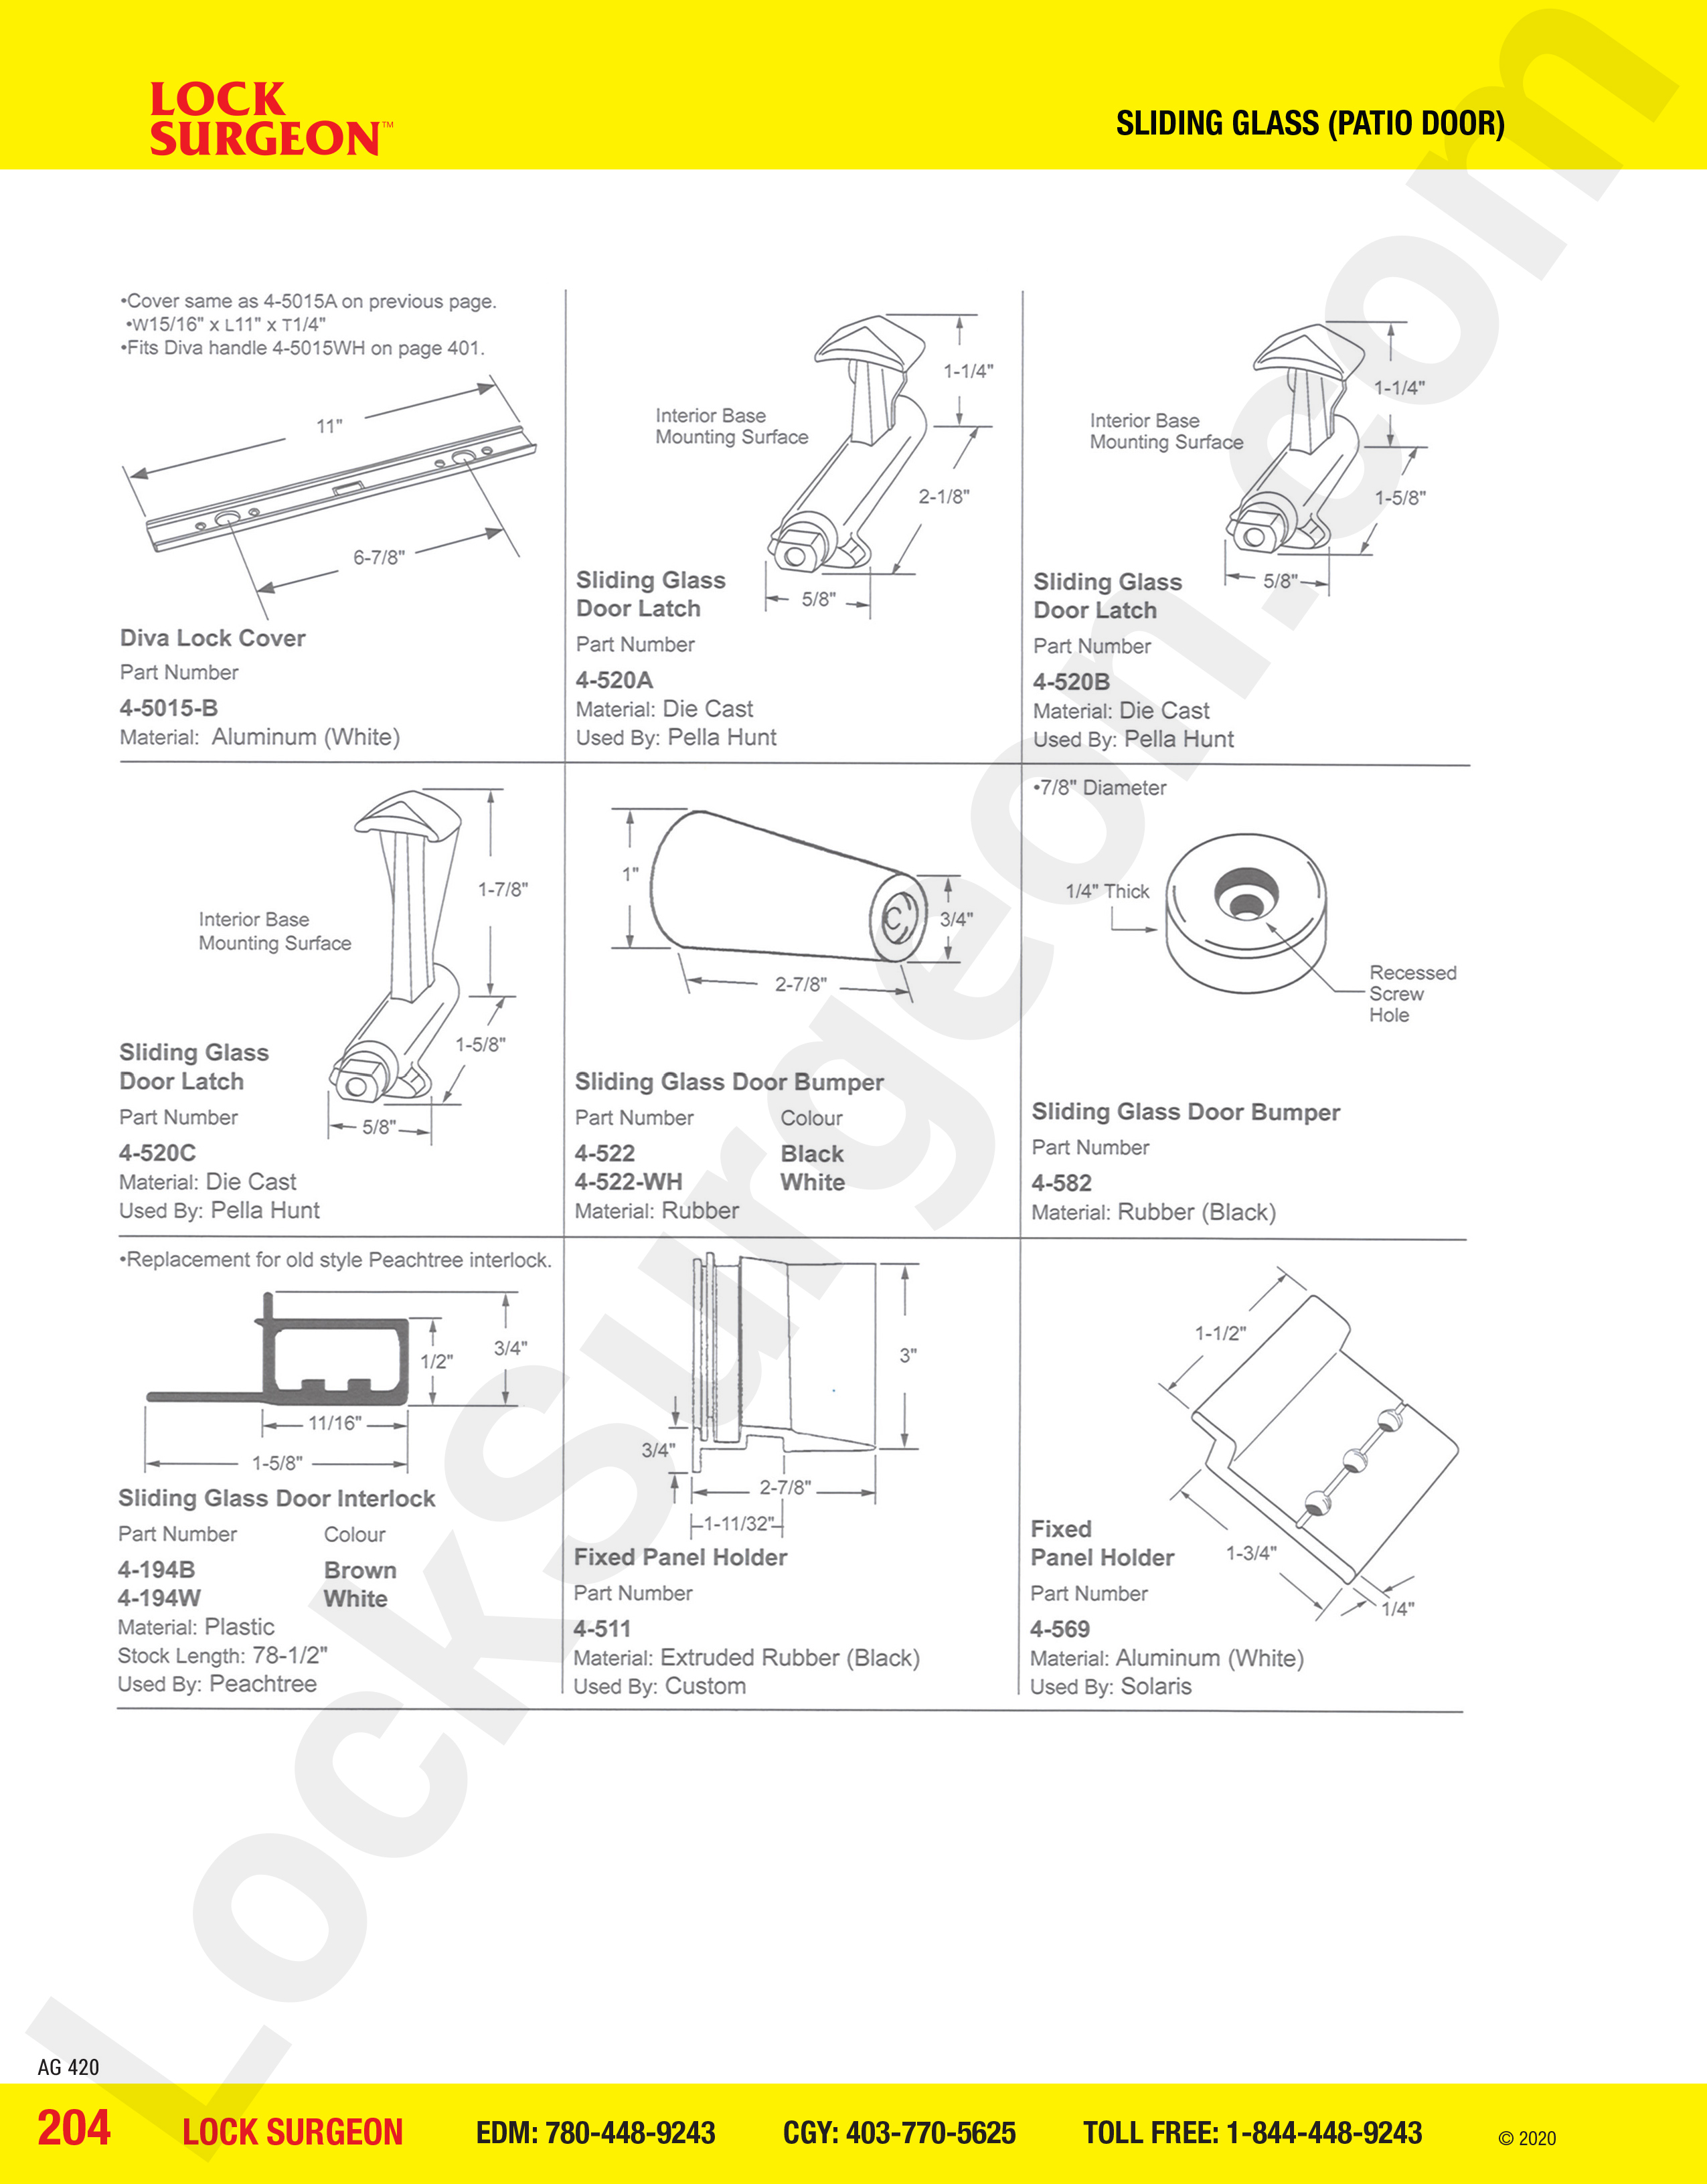 Sliding Glass and Patio Door latches, bumpers, interlocks and holders